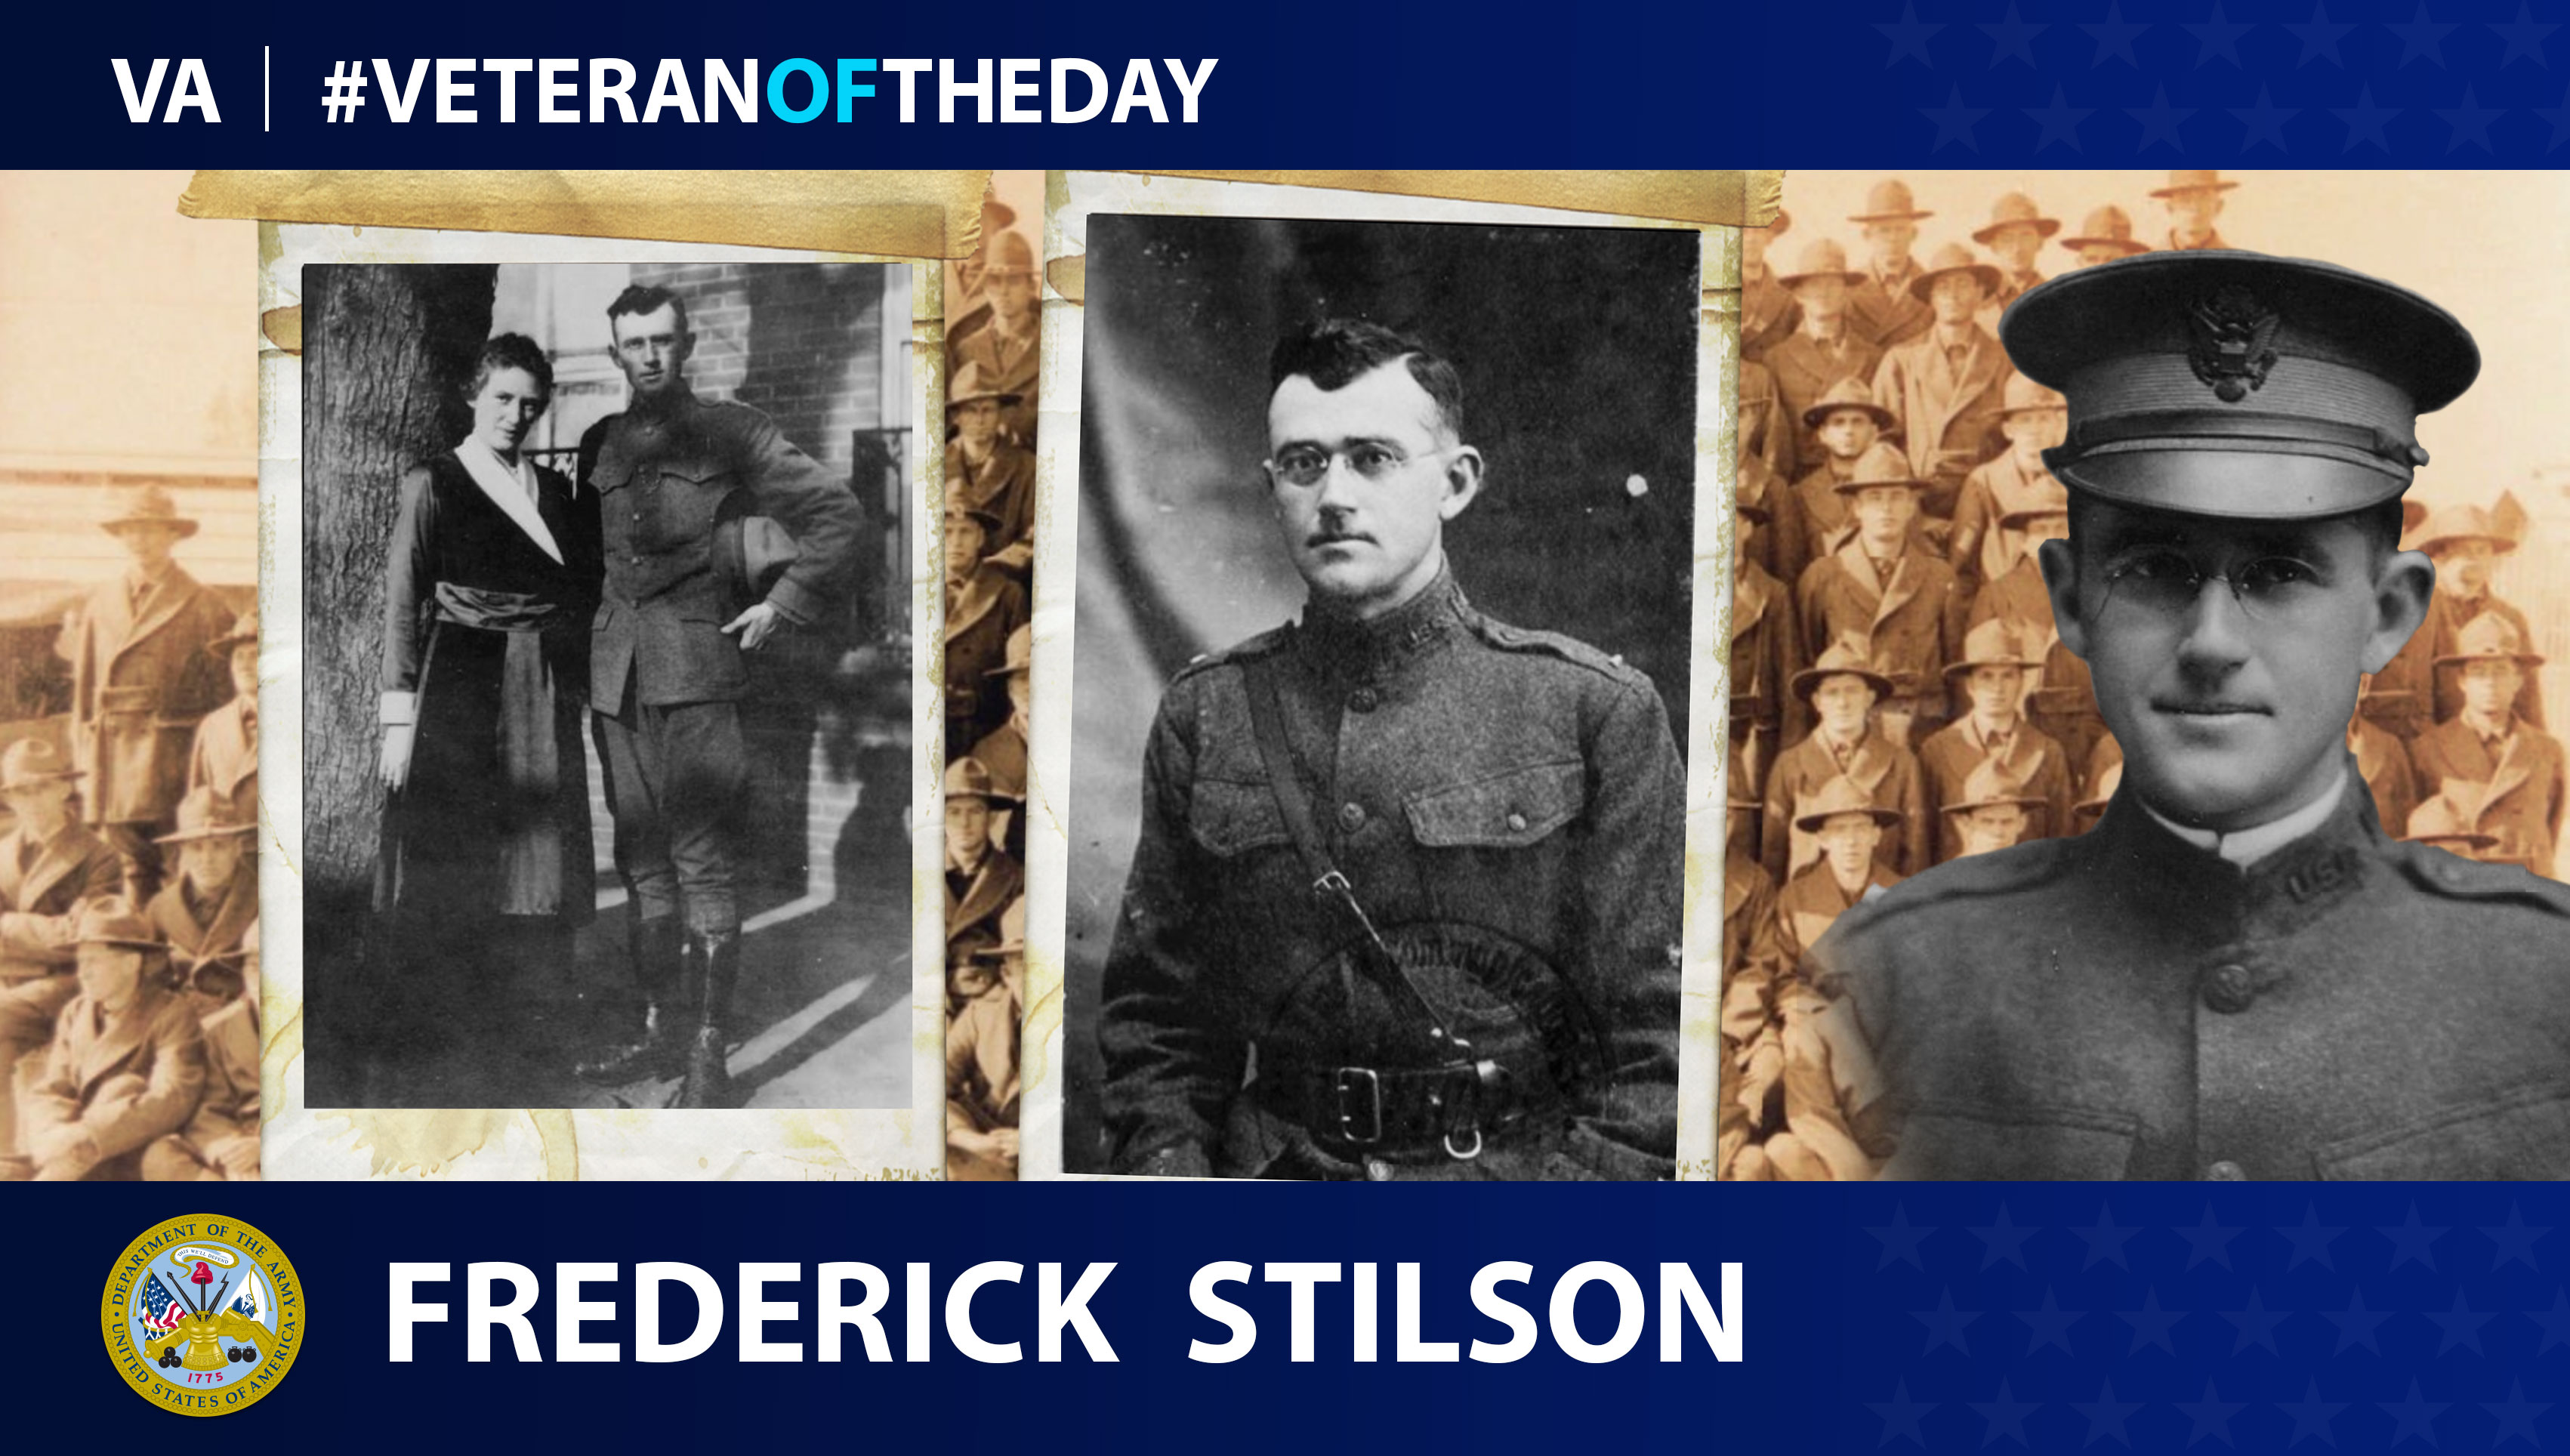 Army Veteran Frederick Clarence Stilson is today's Veteran of the Day.